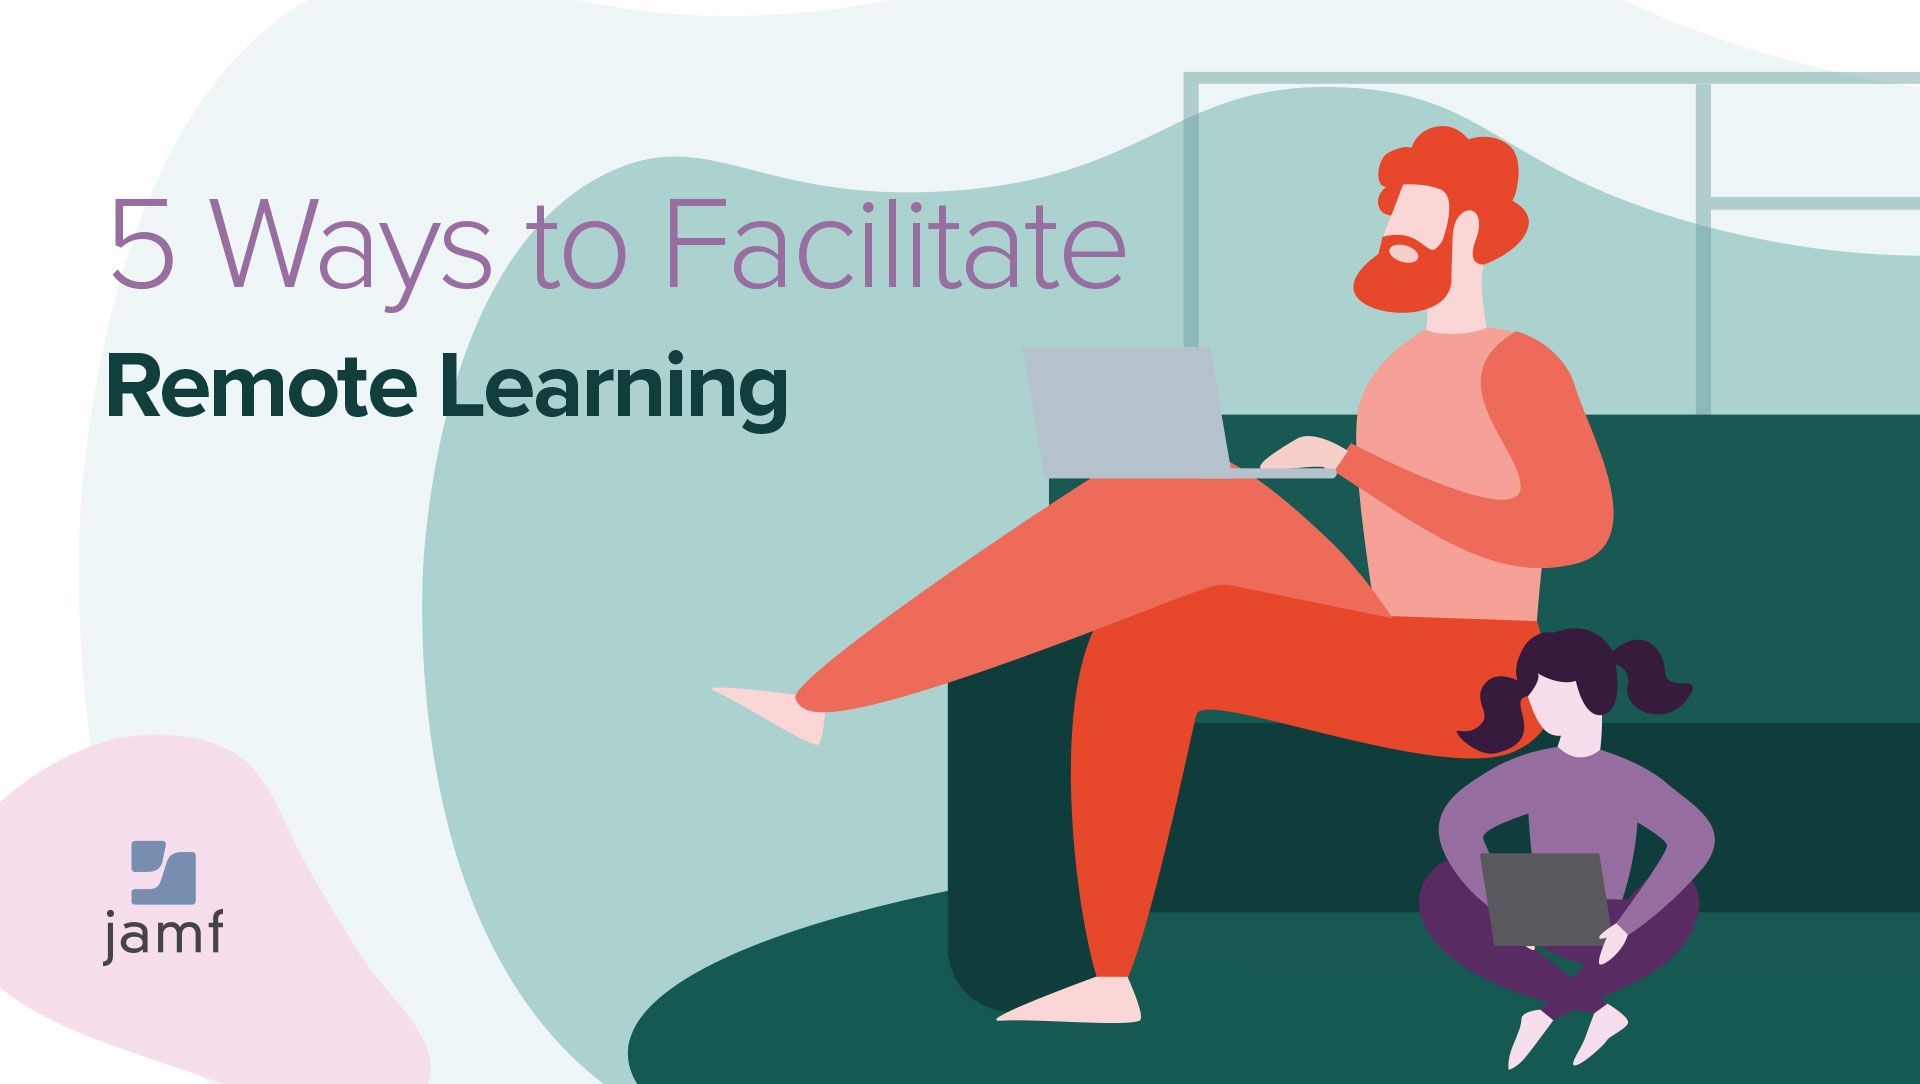 5 ways to facilitate remote learning